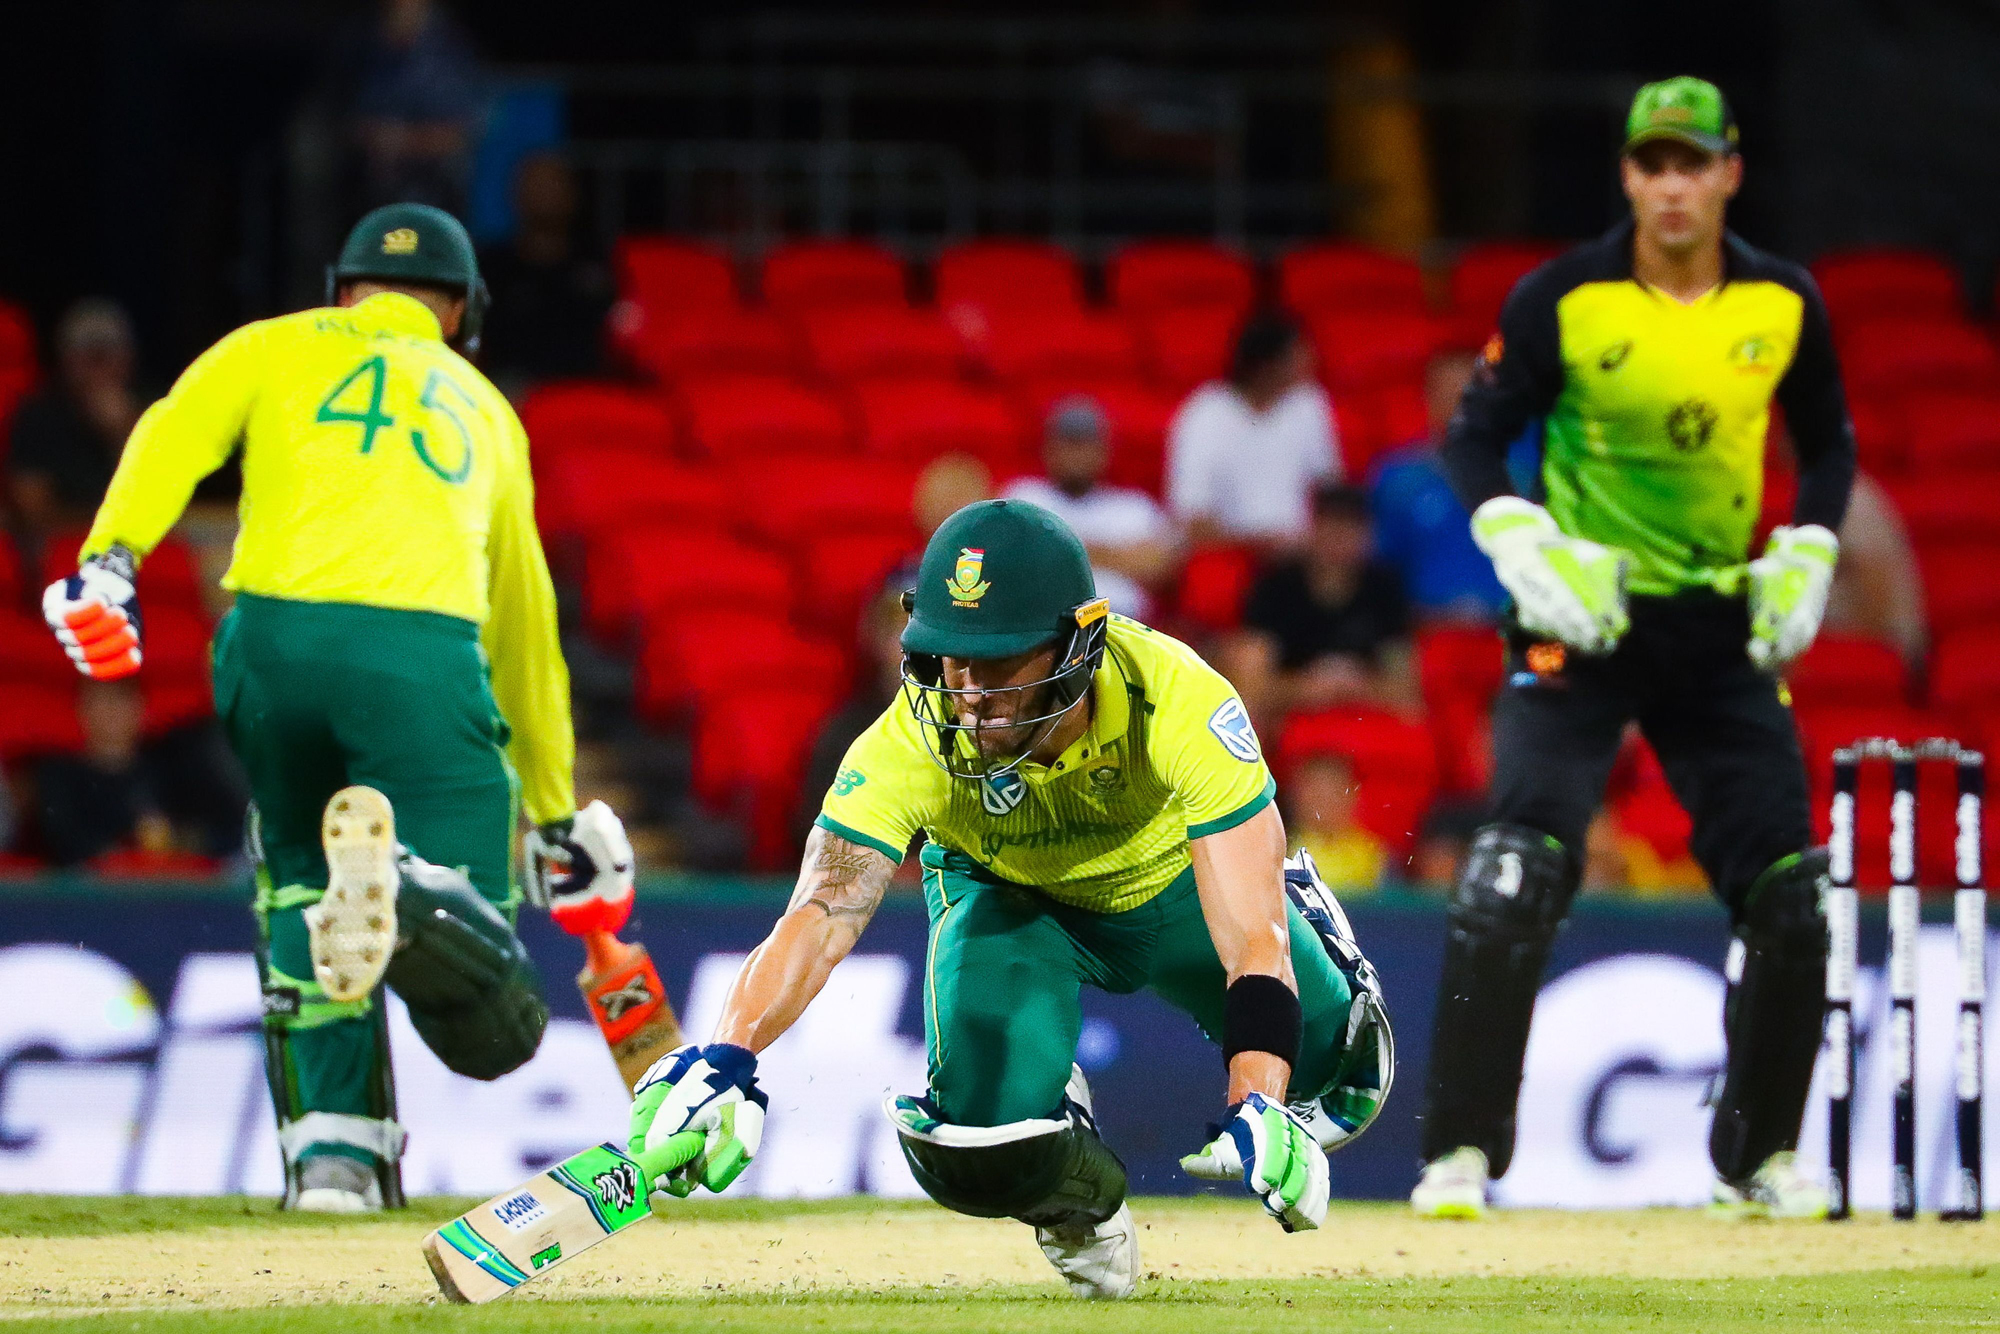 Faf du Plessis of South Africa runs between the wickets during the T20 international cricket match between Australia and South Africa at Metricon Stadium on the Gold Coast on November 17, 2018. (Photo by Patrick HAMILTON / AFP) / -- IMAGE RESTRICTED TO ED